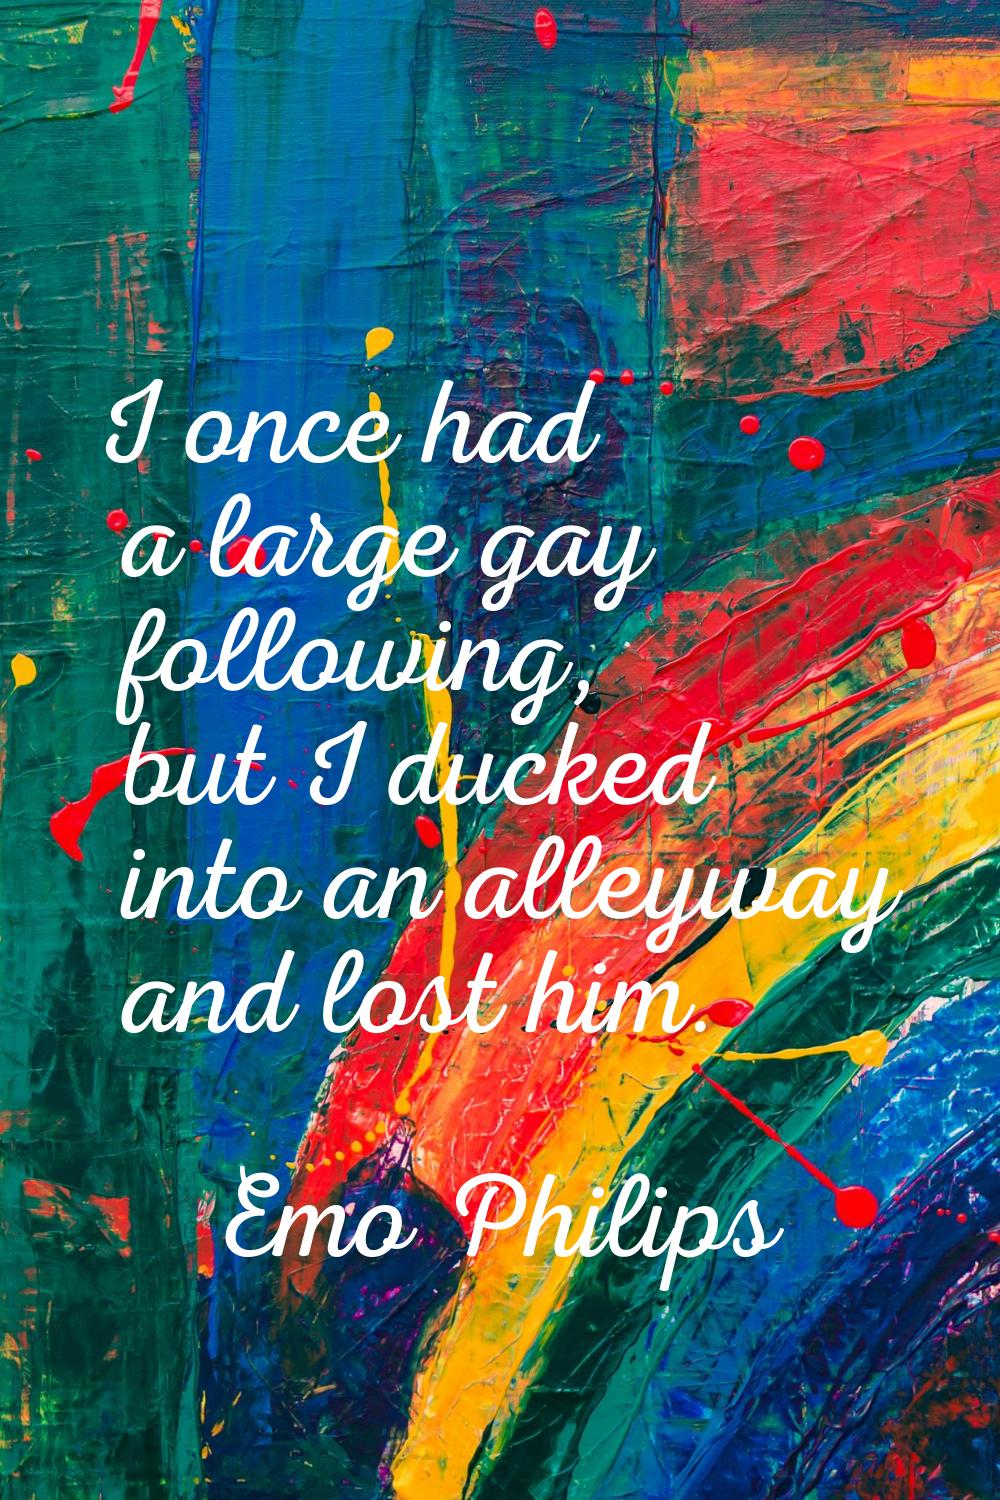 I once had a large gay following, but I ducked into an alleyway and lost him.